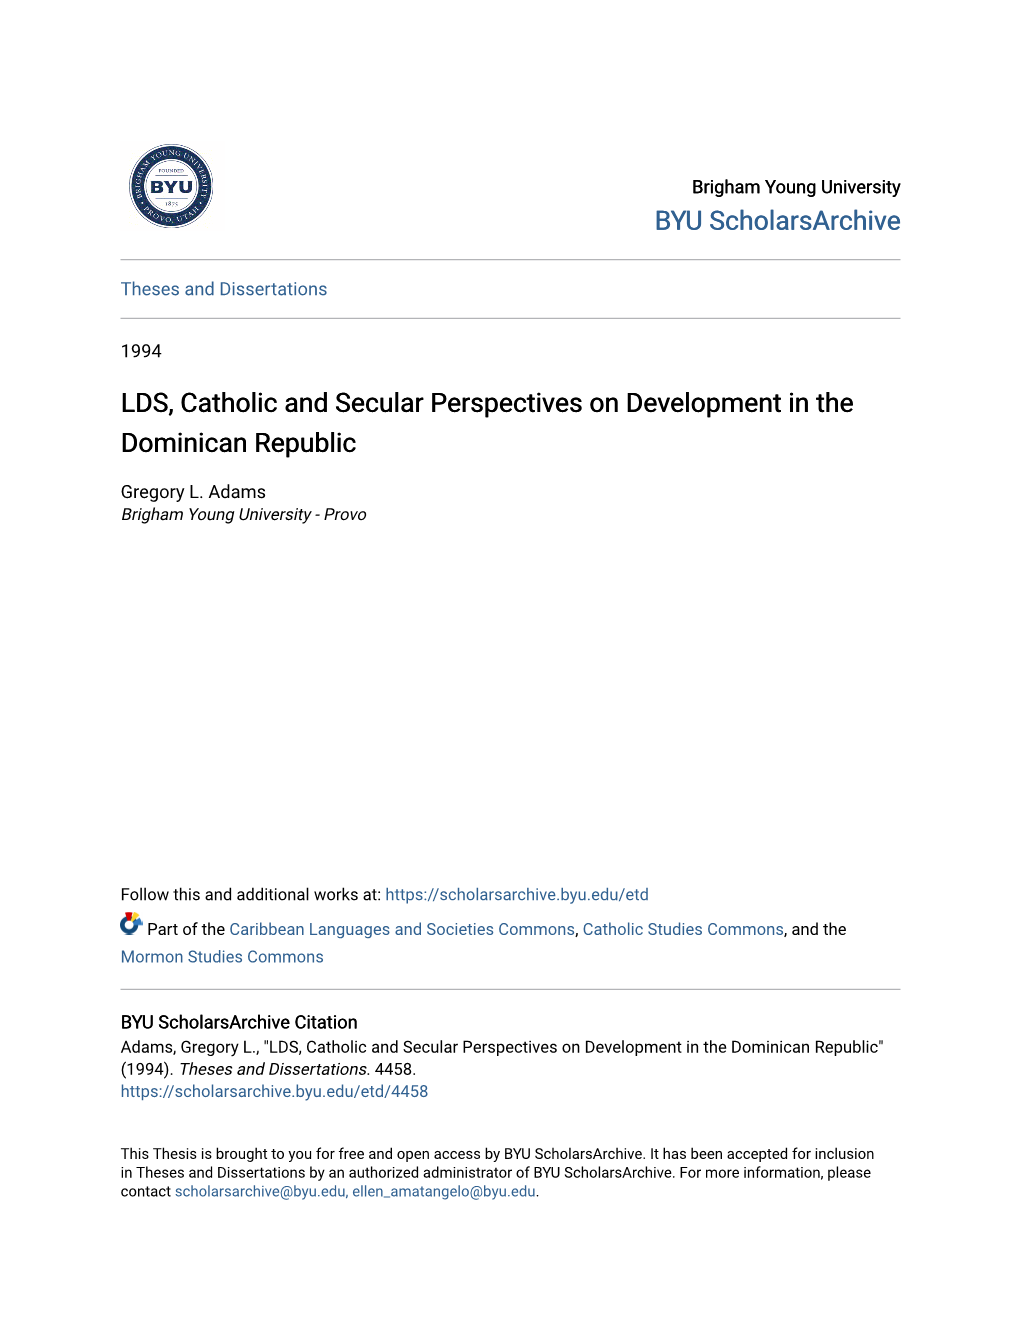 LDS, Catholic and Secular Perspectives on Development in the Dominican Republic